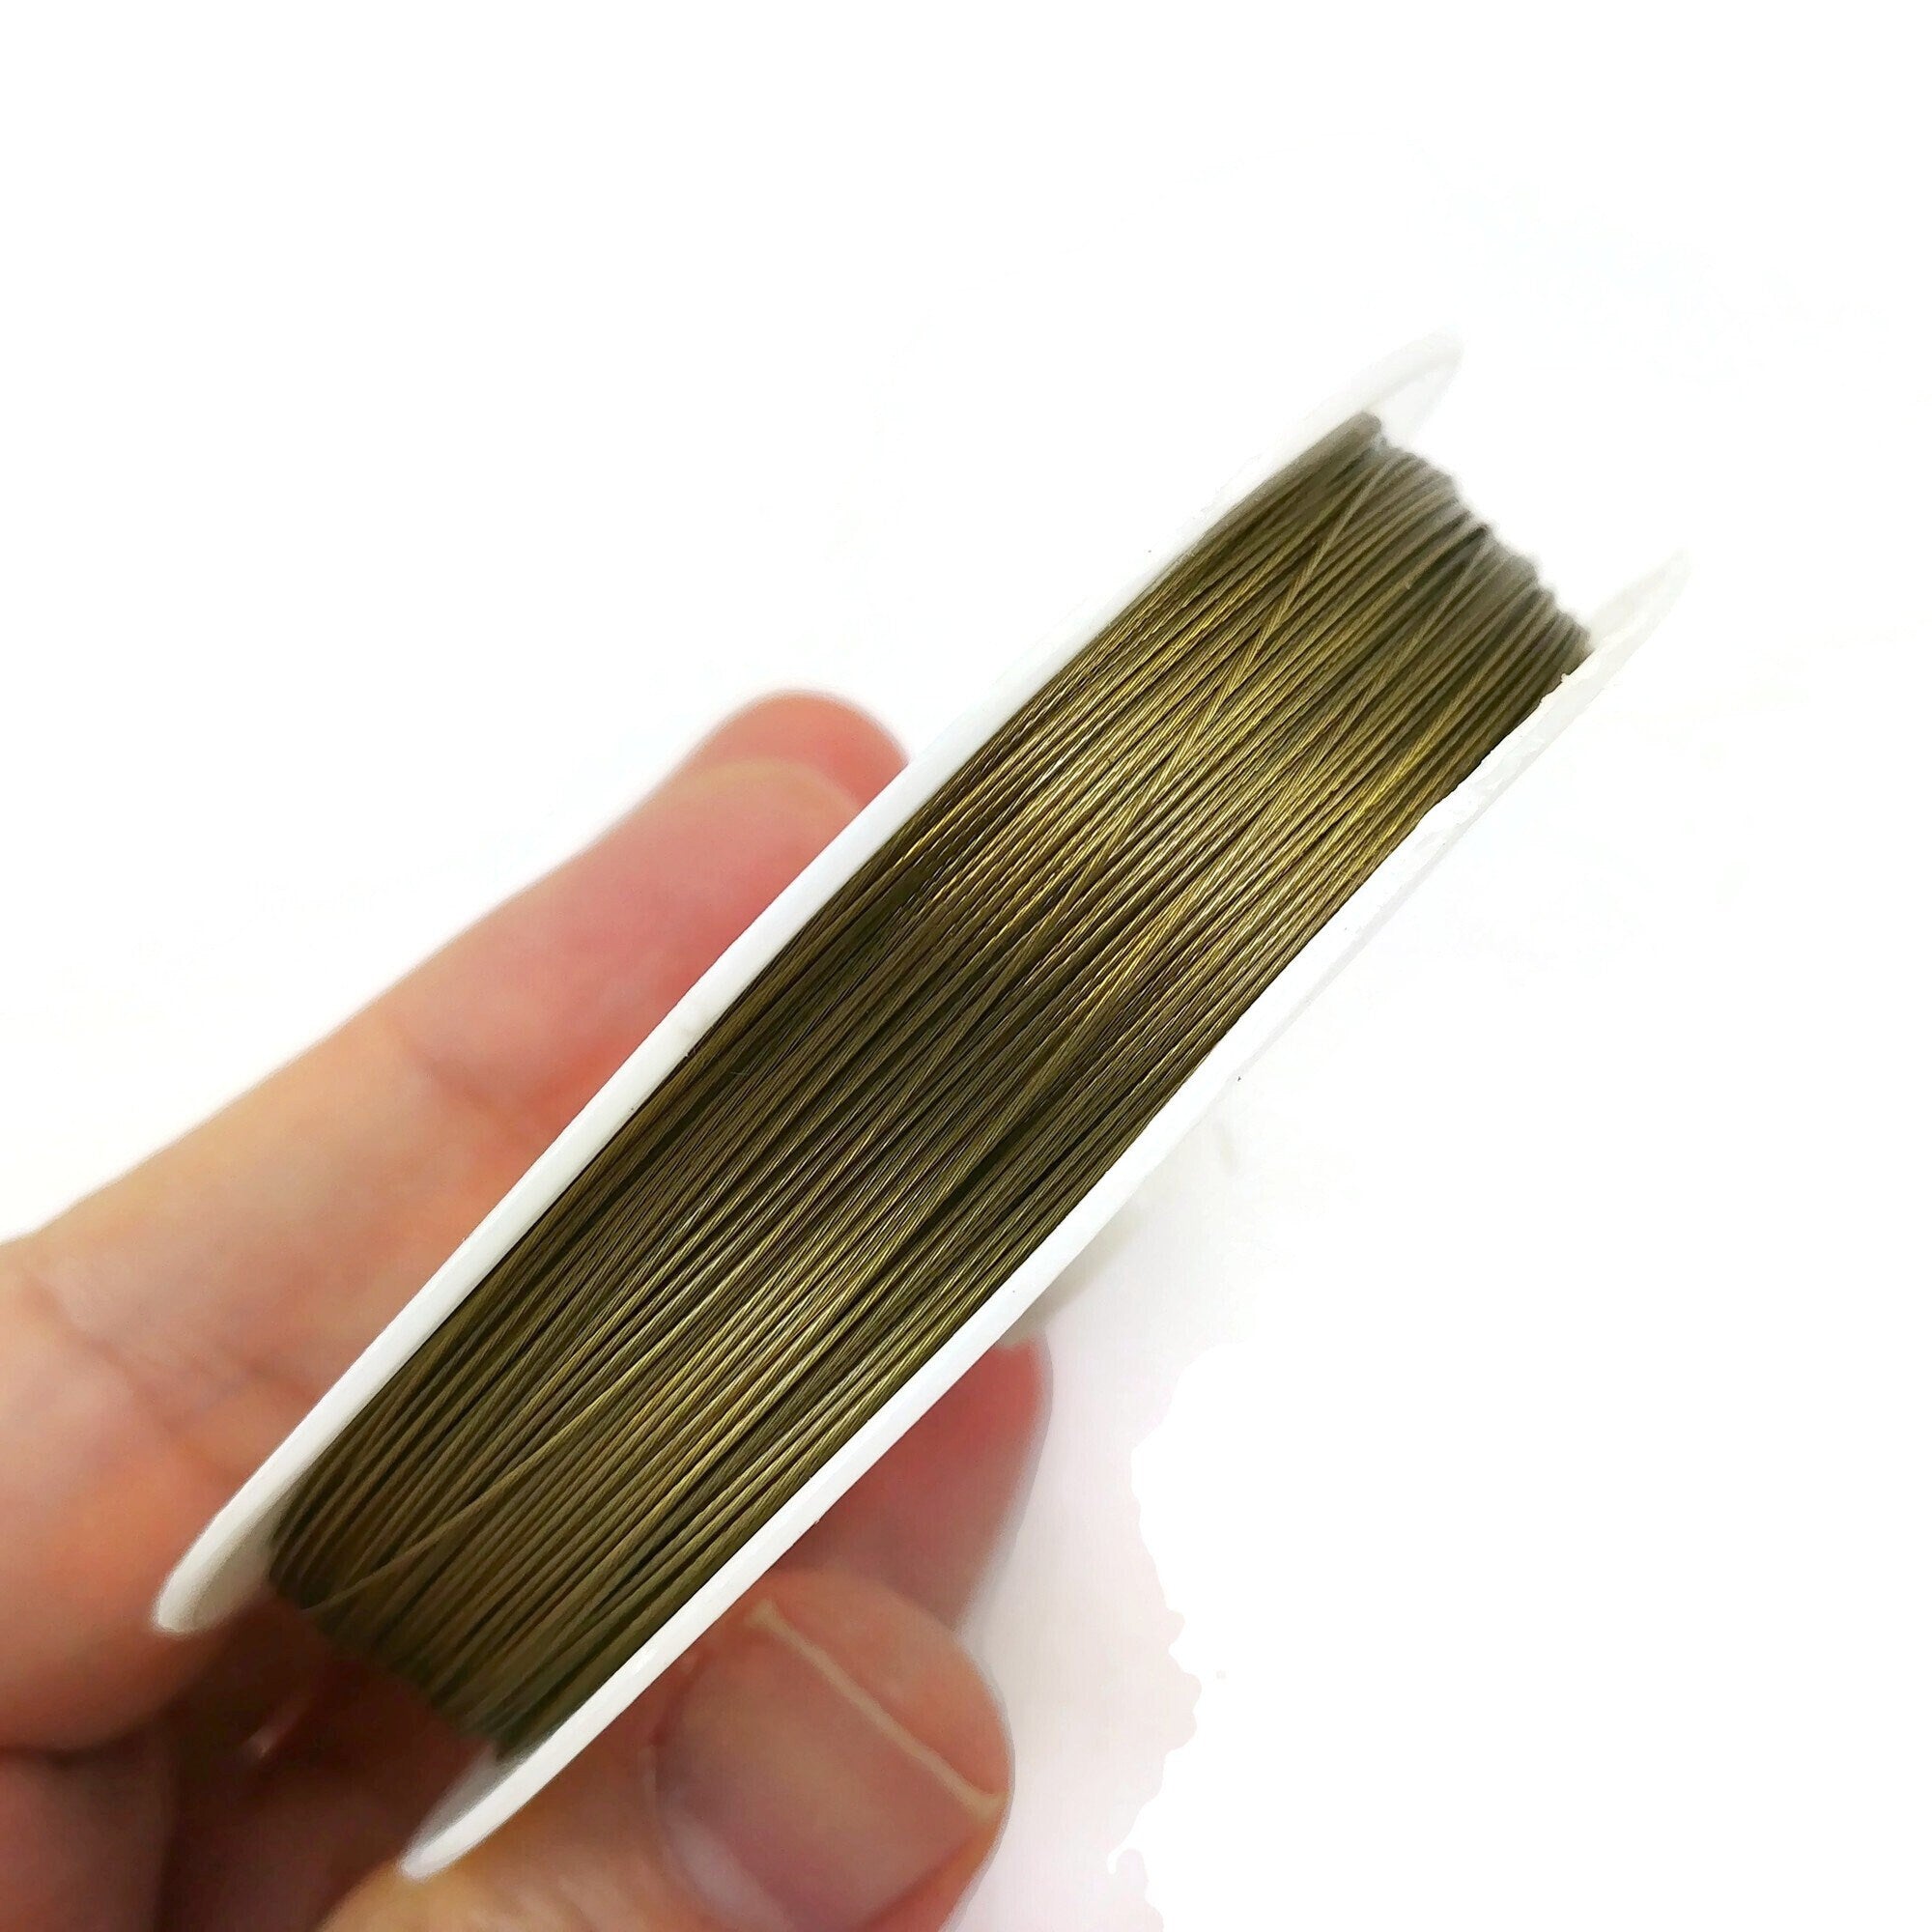 Stainless steel metal wire - Tiger tail beading cord findings - Necklace, bracelet, jewelry making supplies